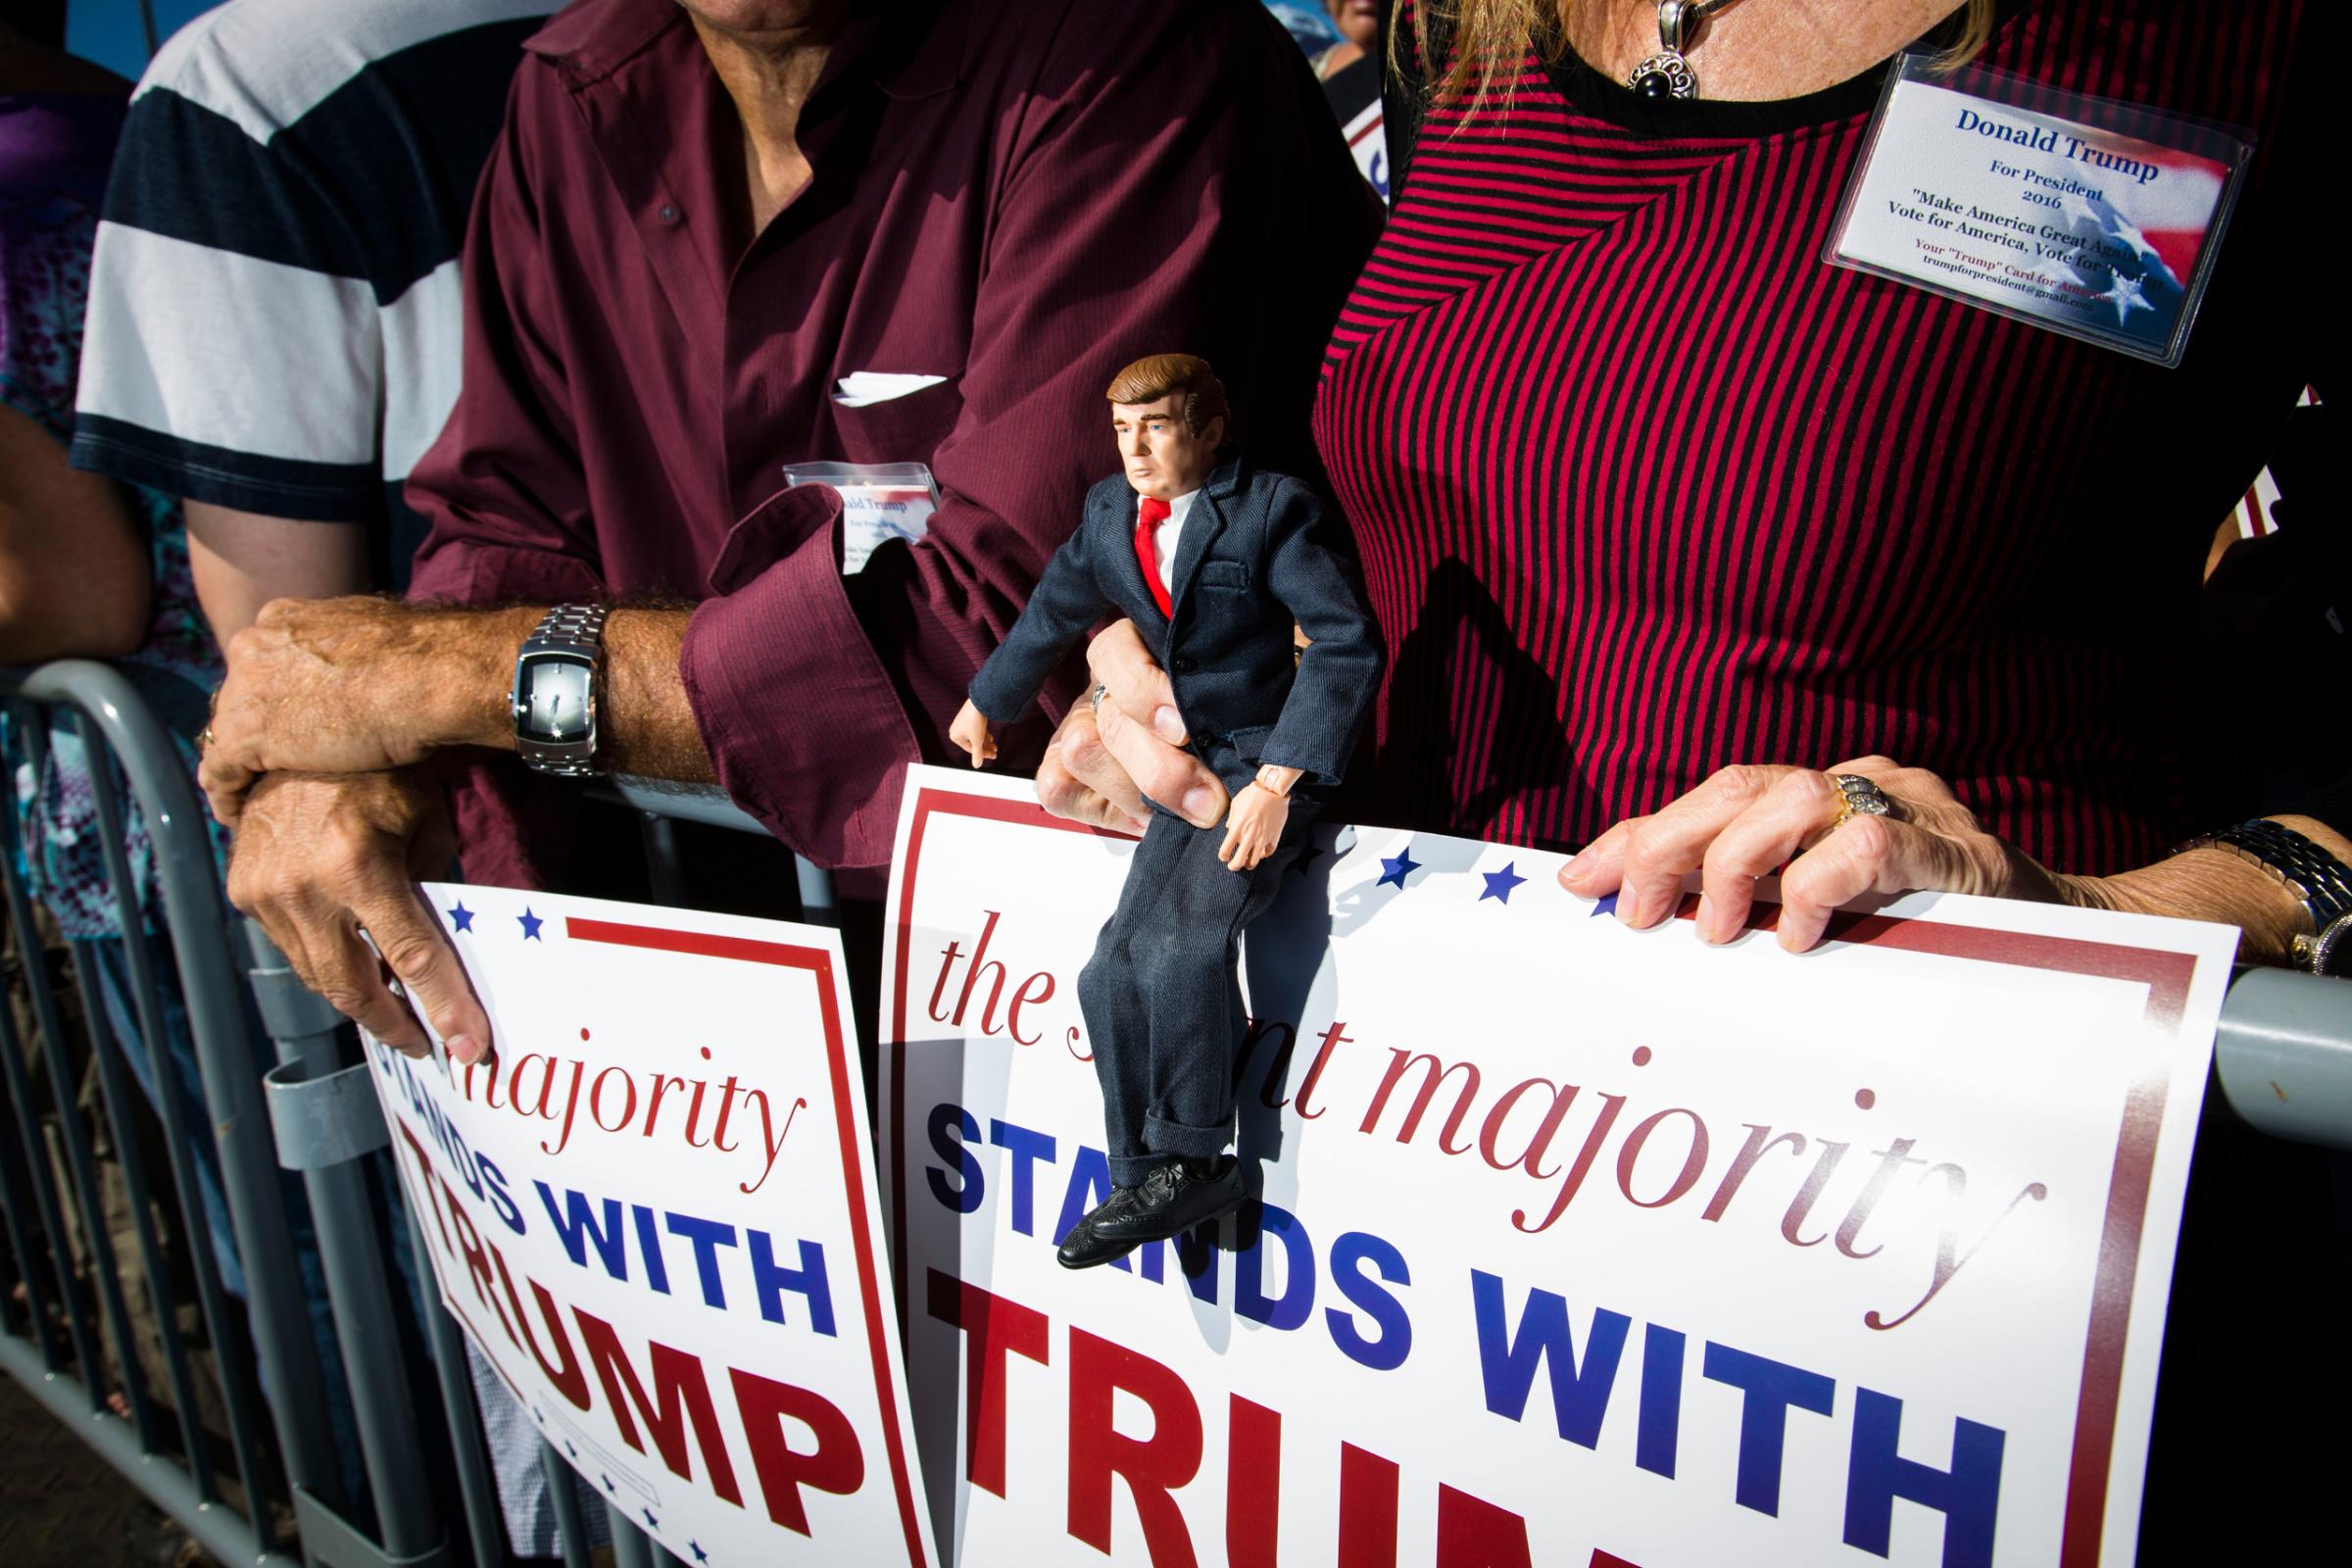 Supporter of Republican presidential candidate Donald Trump holds up a doll in the likeness of Trump at a rally in Sarasota, Fla. Nov. 28, 2015.